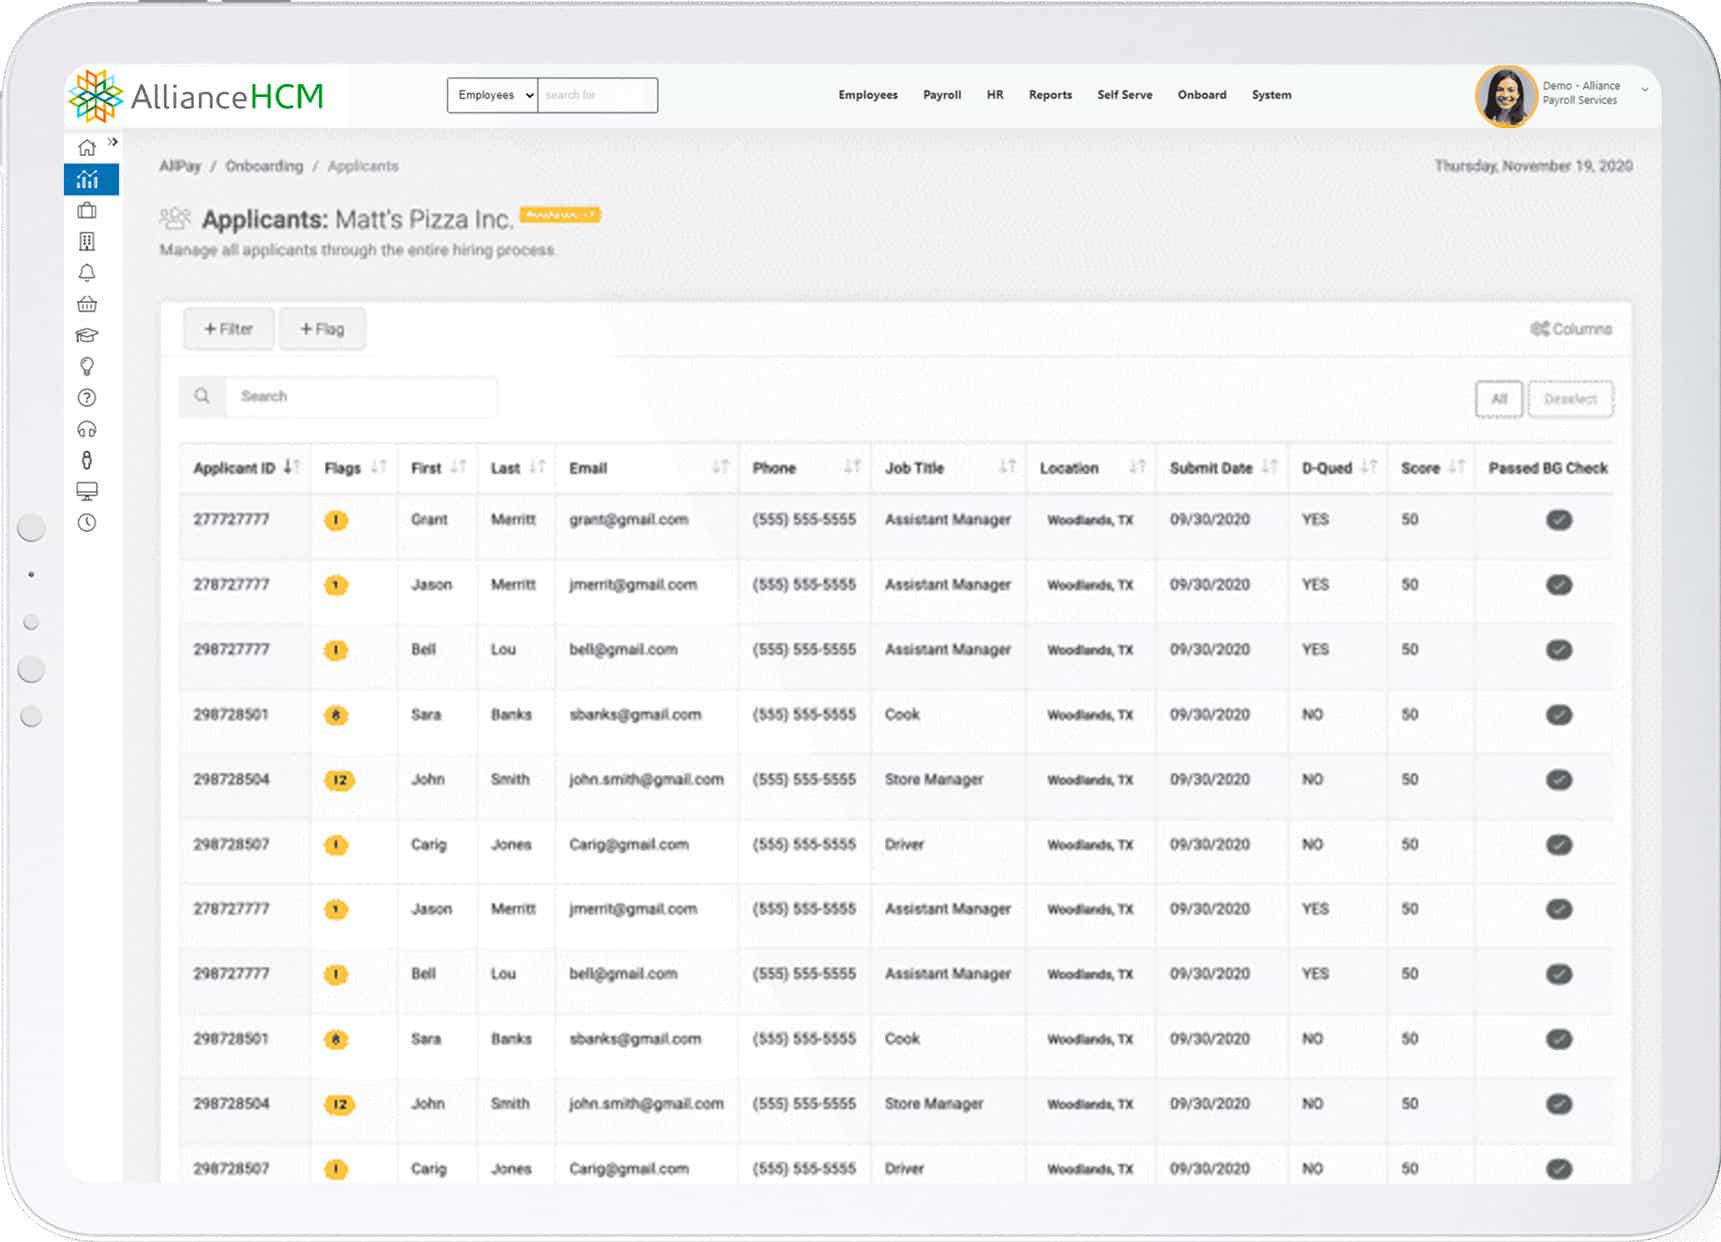 AllianceHCM applicant tracking and talent management solution